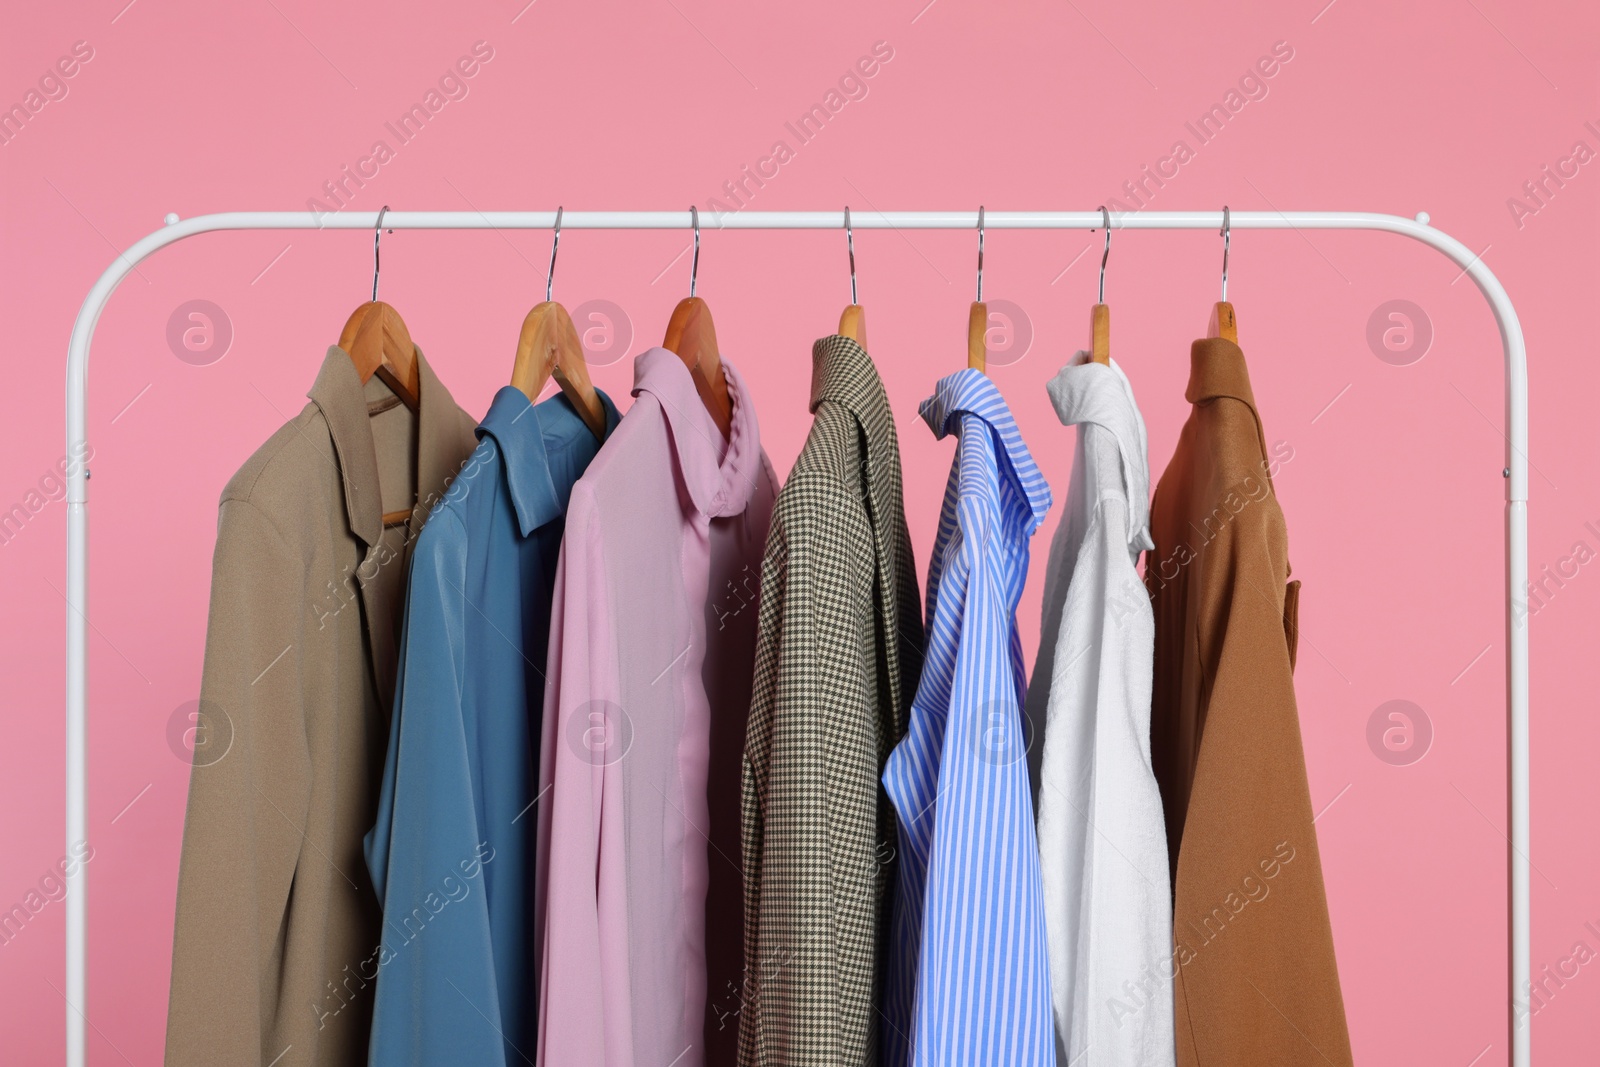 Photo of Rack with stylish clothes on wooden hangers against pink background